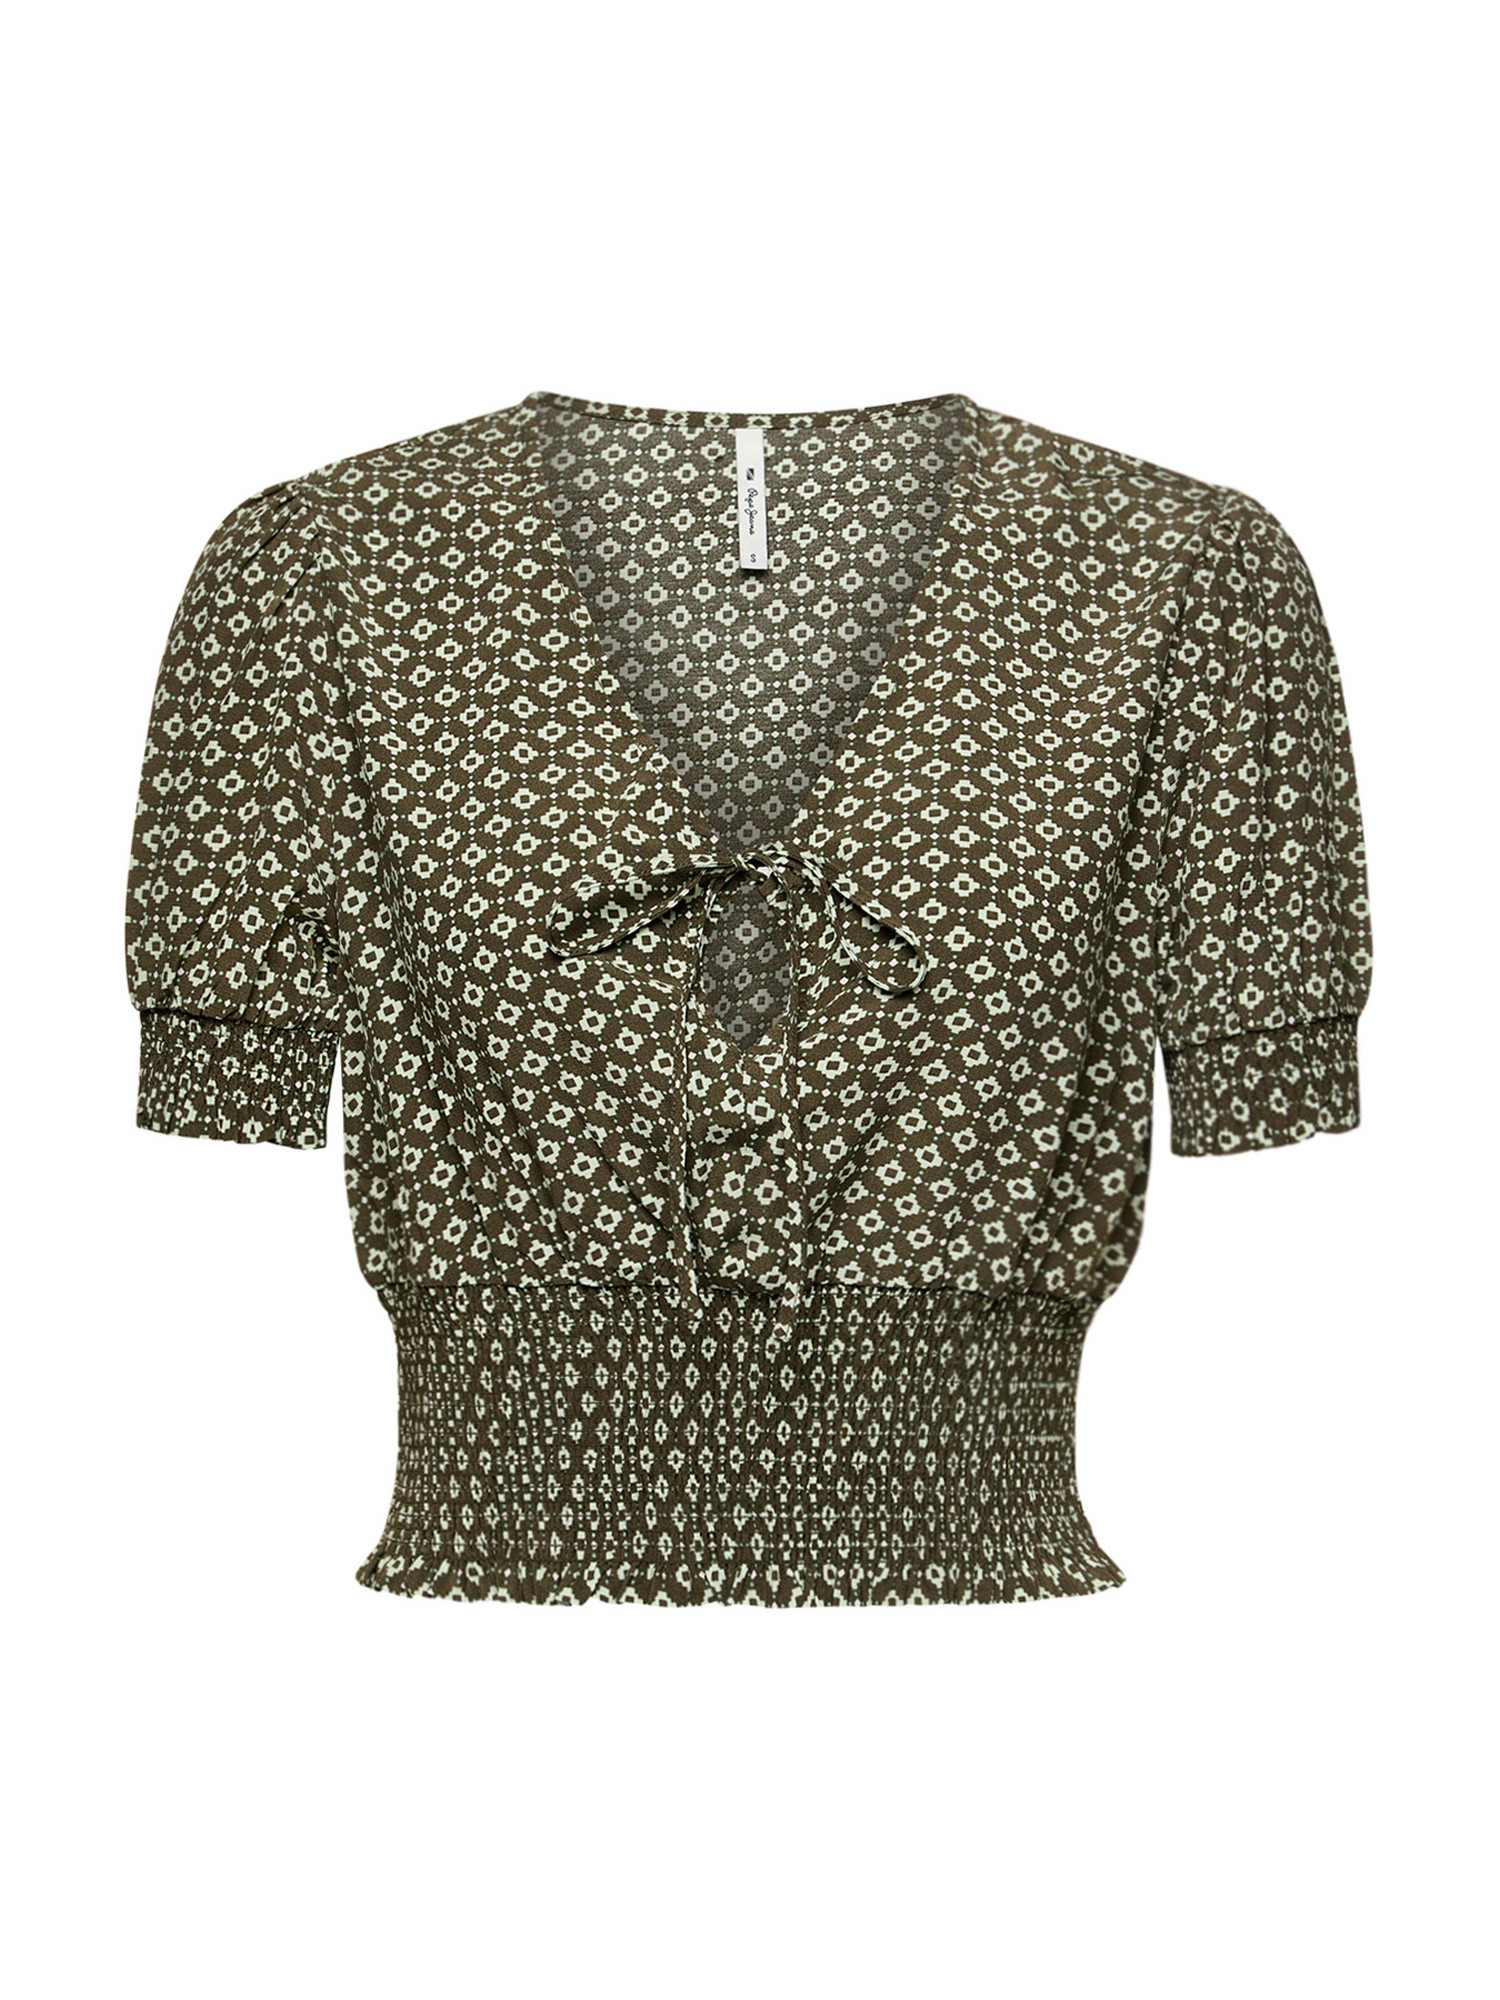 Pepe Jeans - Blouse with geometric print, Olive Green, large image number 0